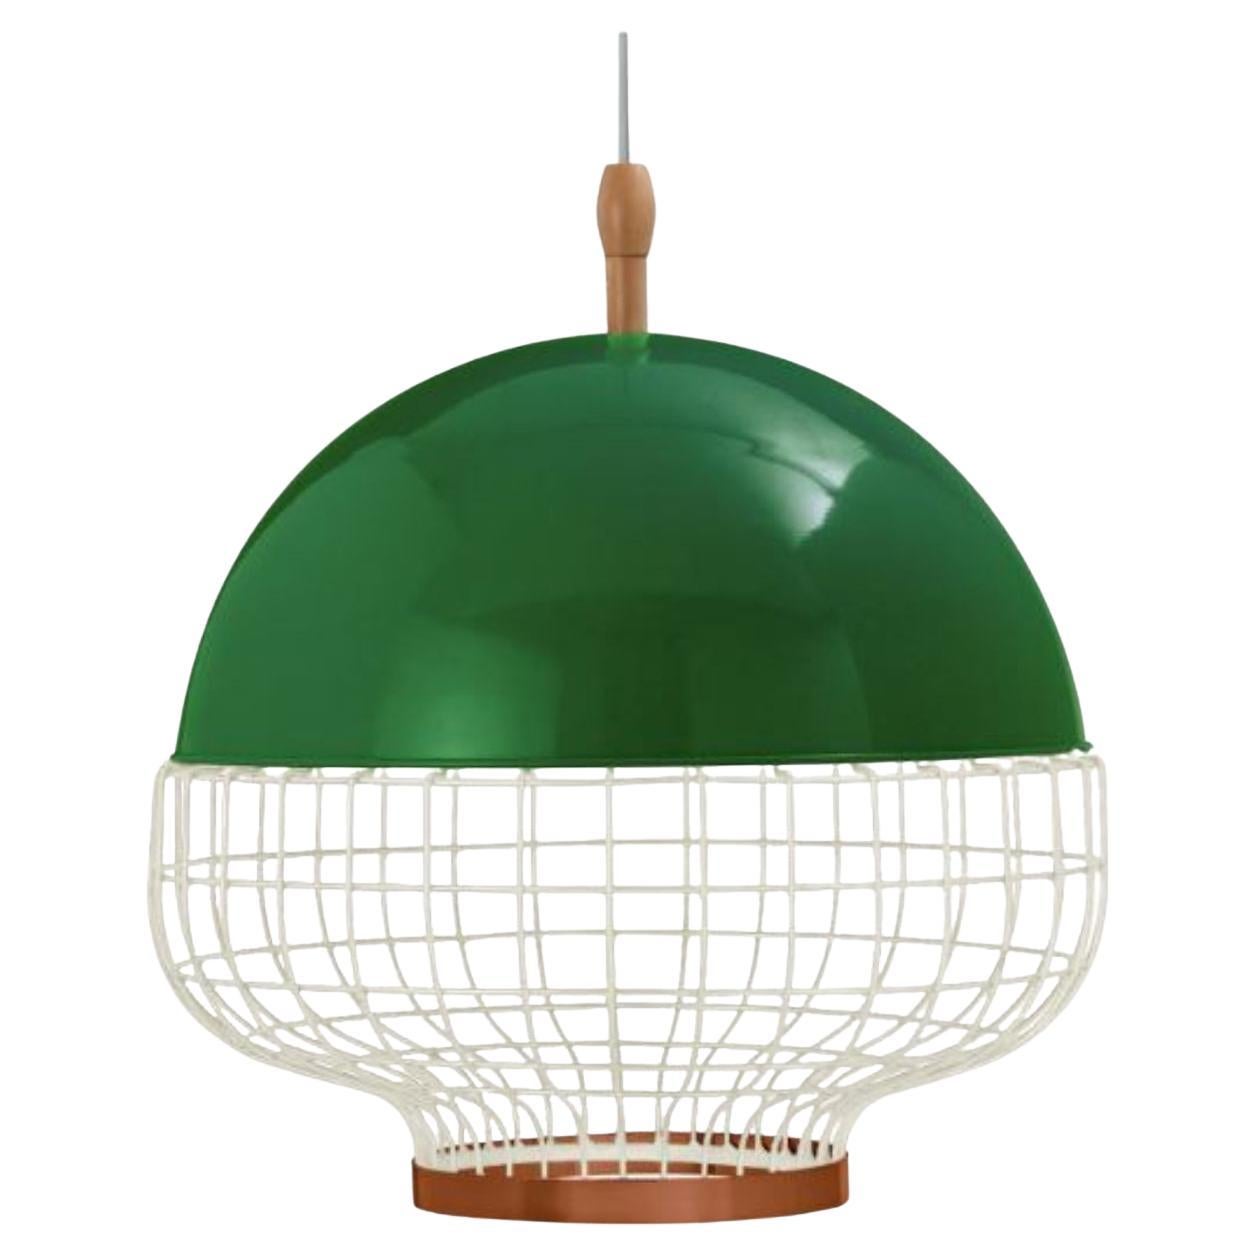 Emerald Magnolia I Suspension Lamp with Copper Ring by Dooq For Sale